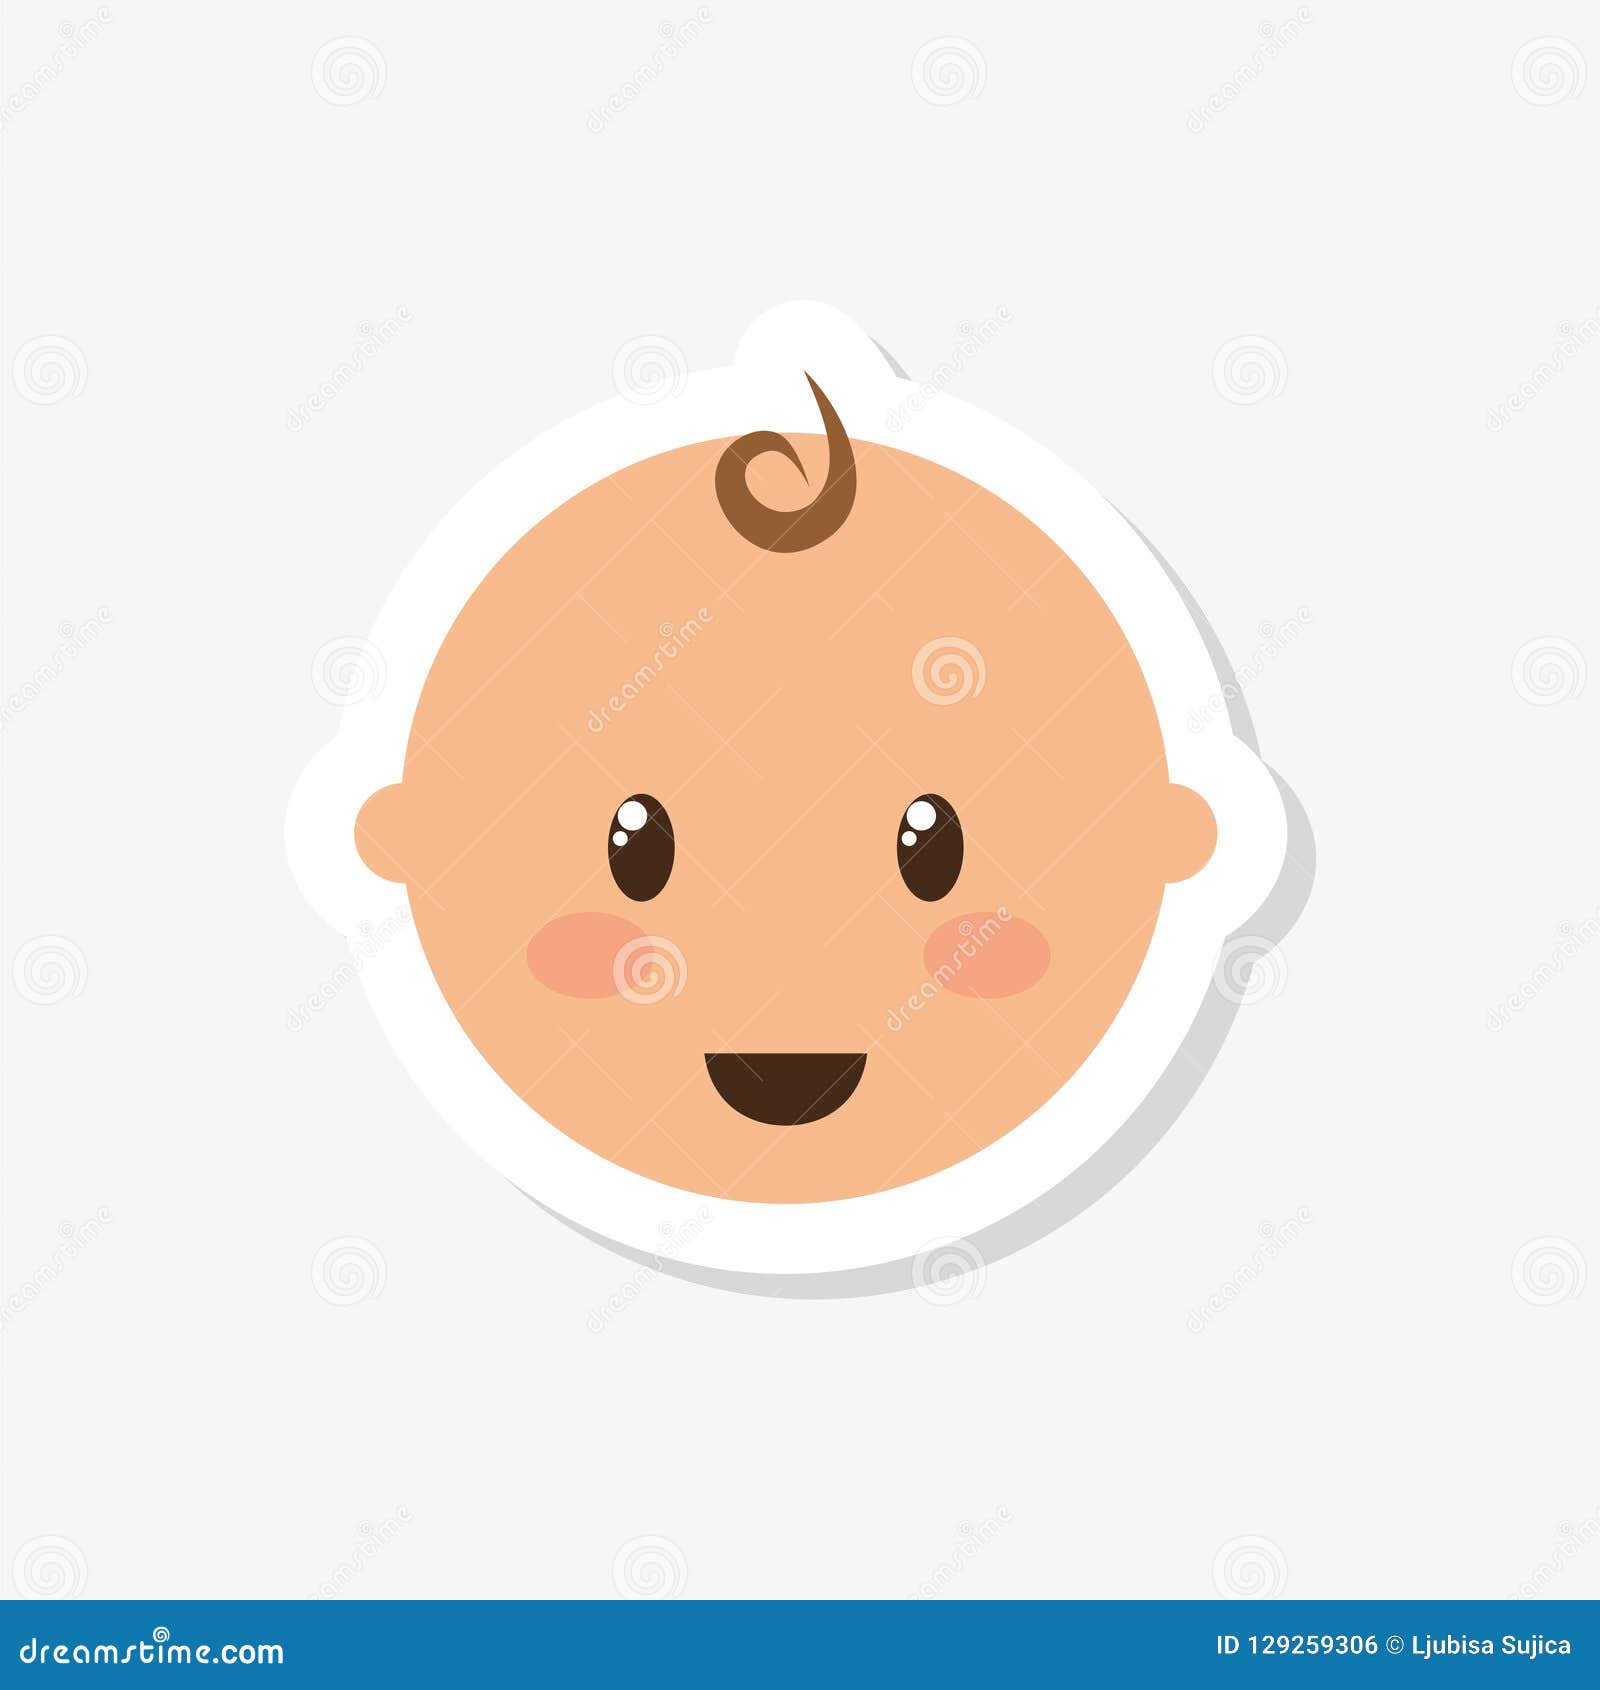 Cute Baby Sticker, Baby Face Icon Stock Illustration of expression: 129259306